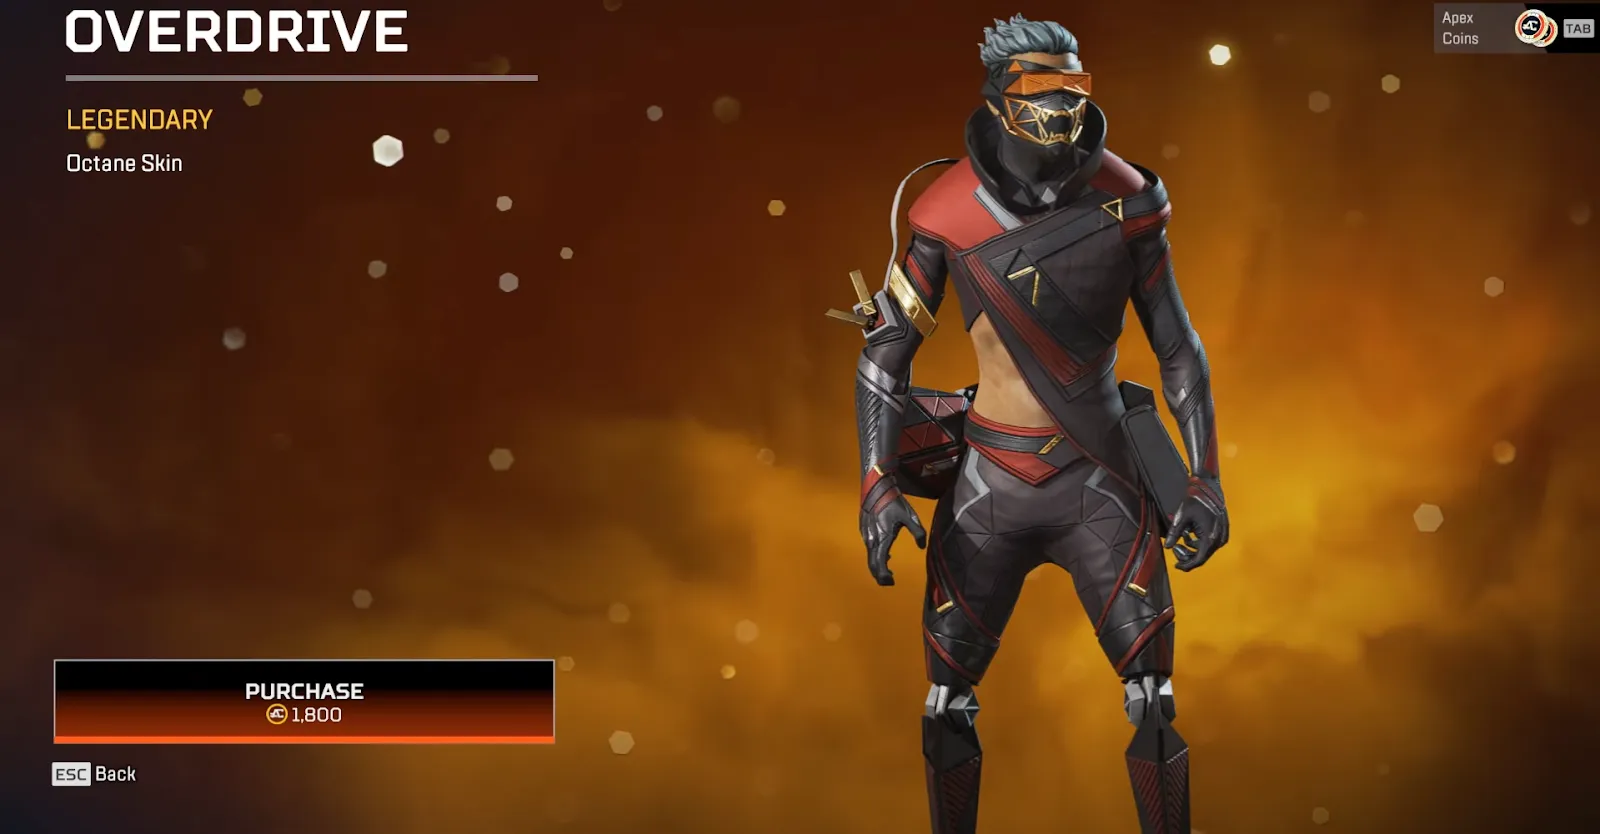 The Overdrive skin in Apex Legends